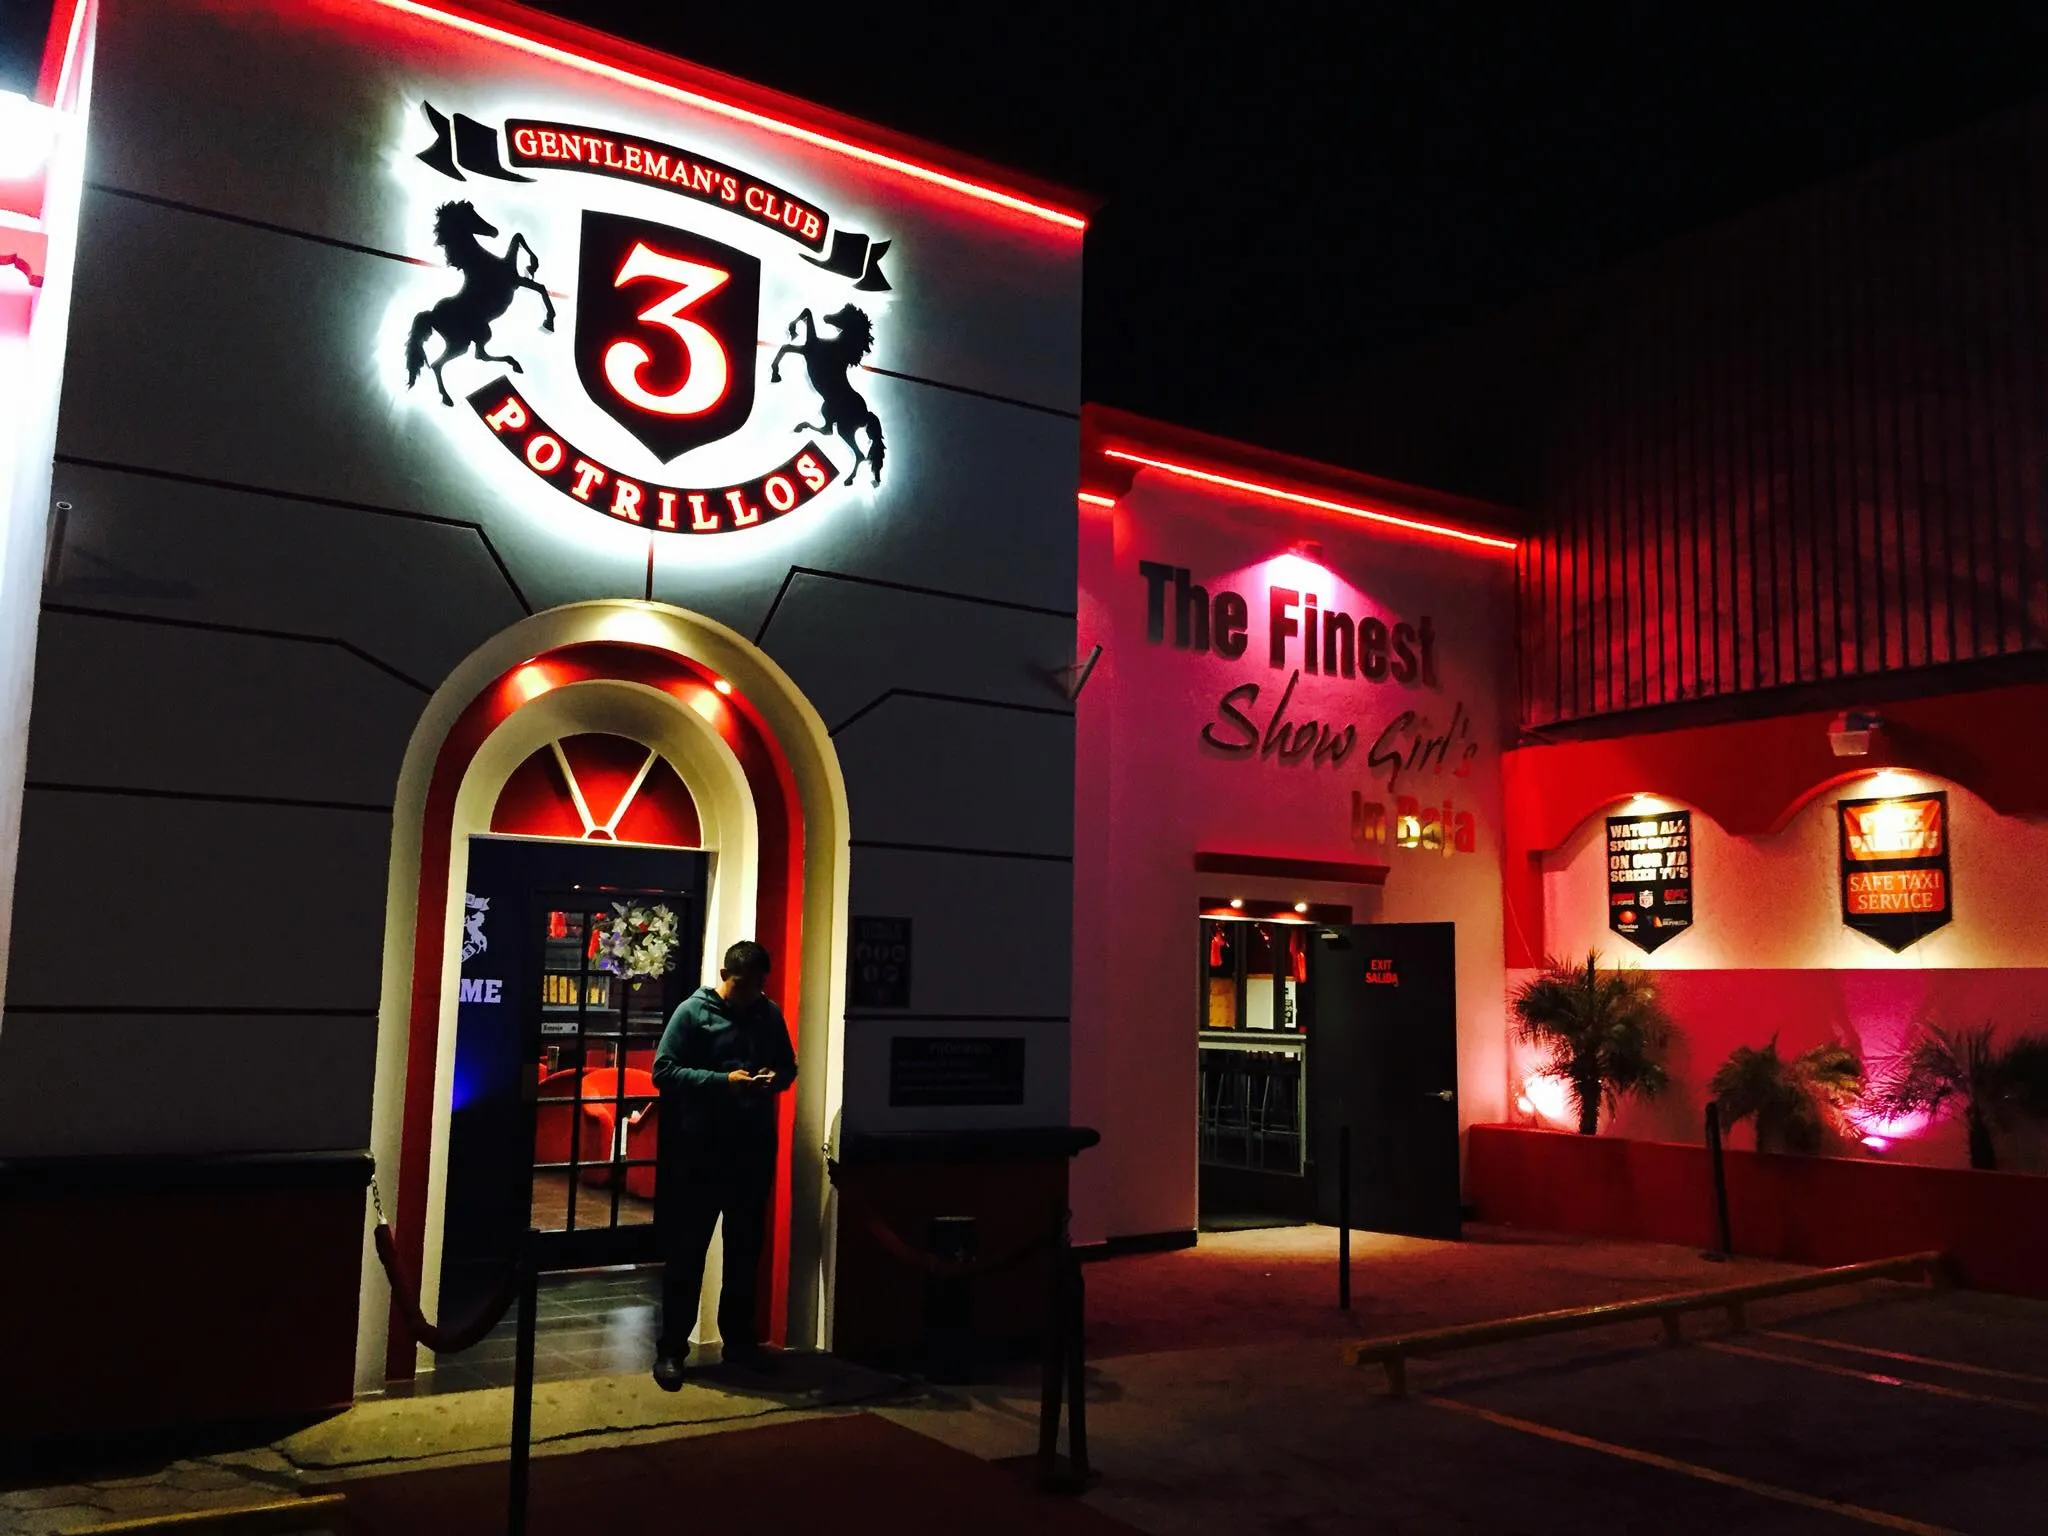 3 Potrillos Gentlemans Club in Mexico, North America | Strip Clubs,Red Light Places - Rated 0.9